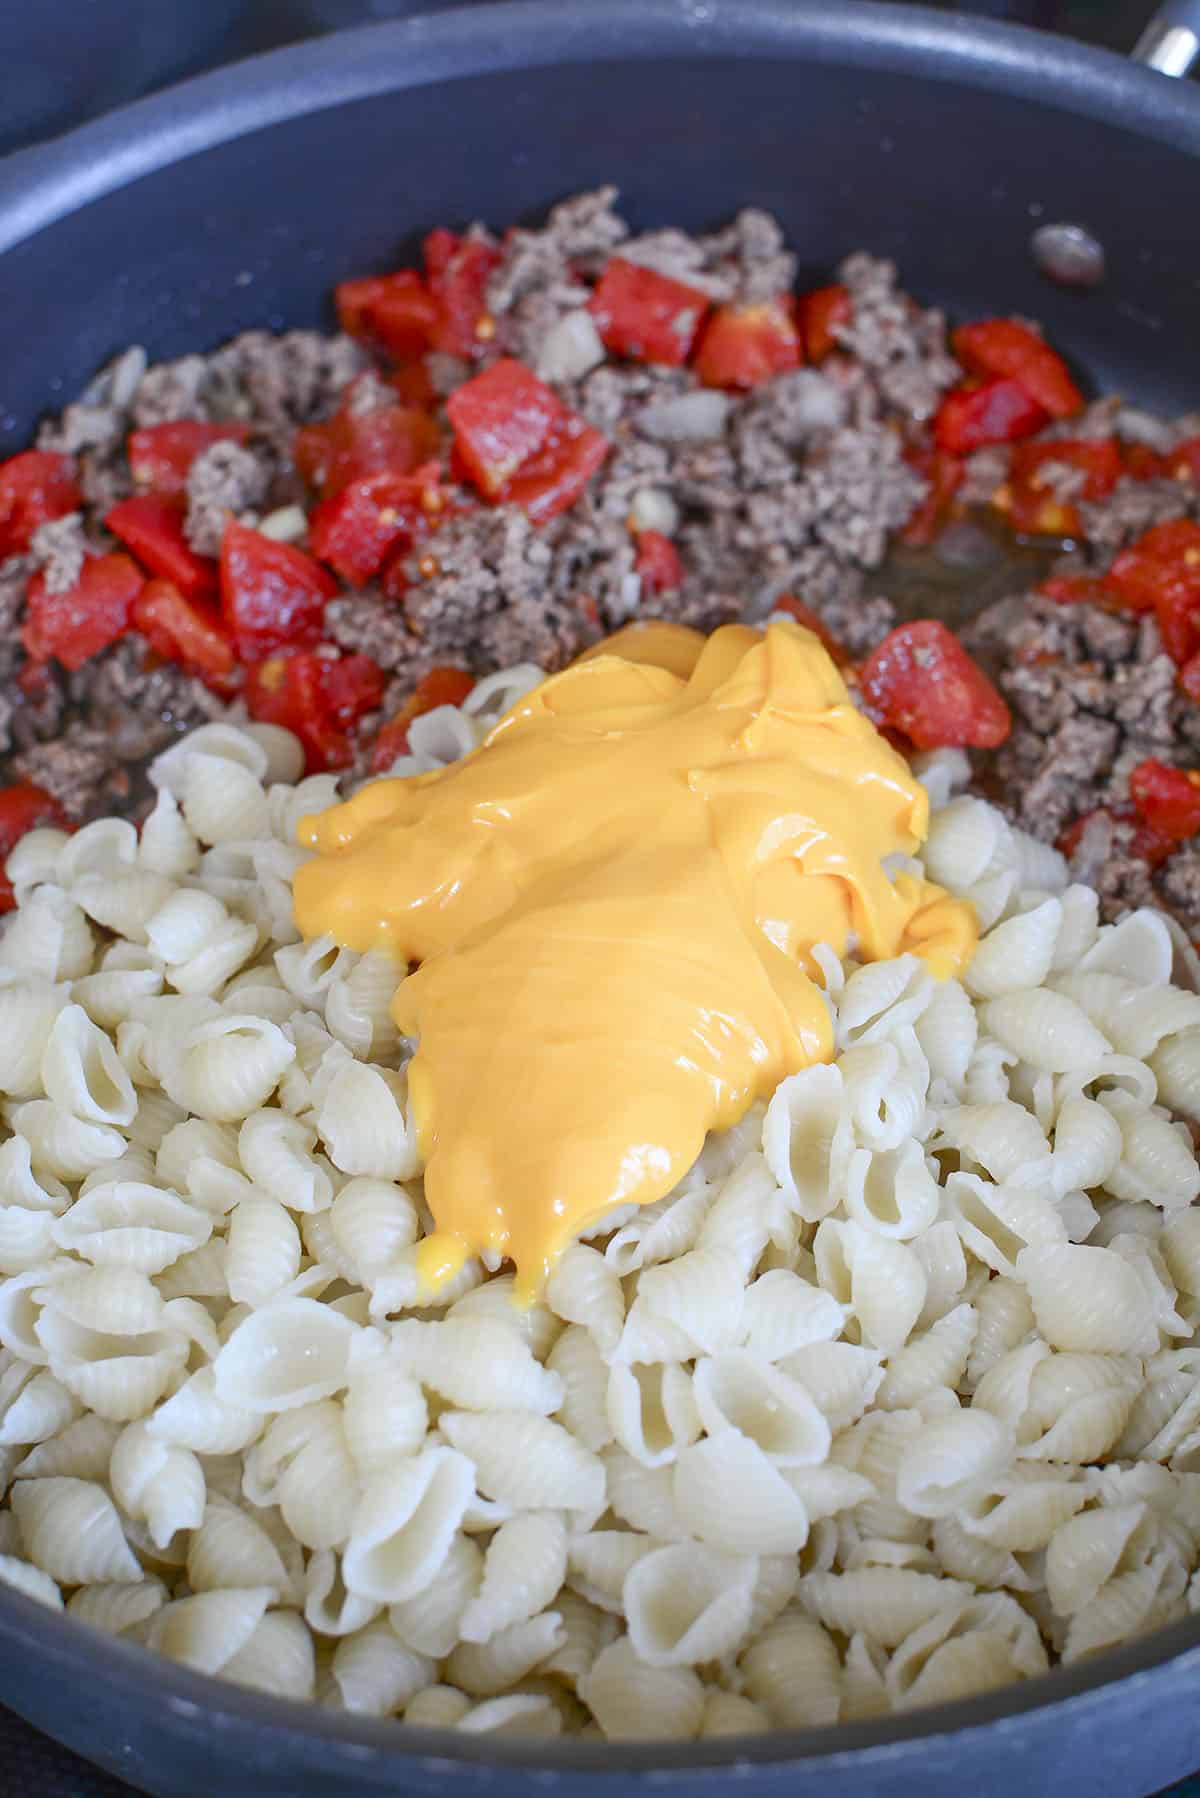 Ground beef cooked with tomatoes, pasta and cheese added to the pan.